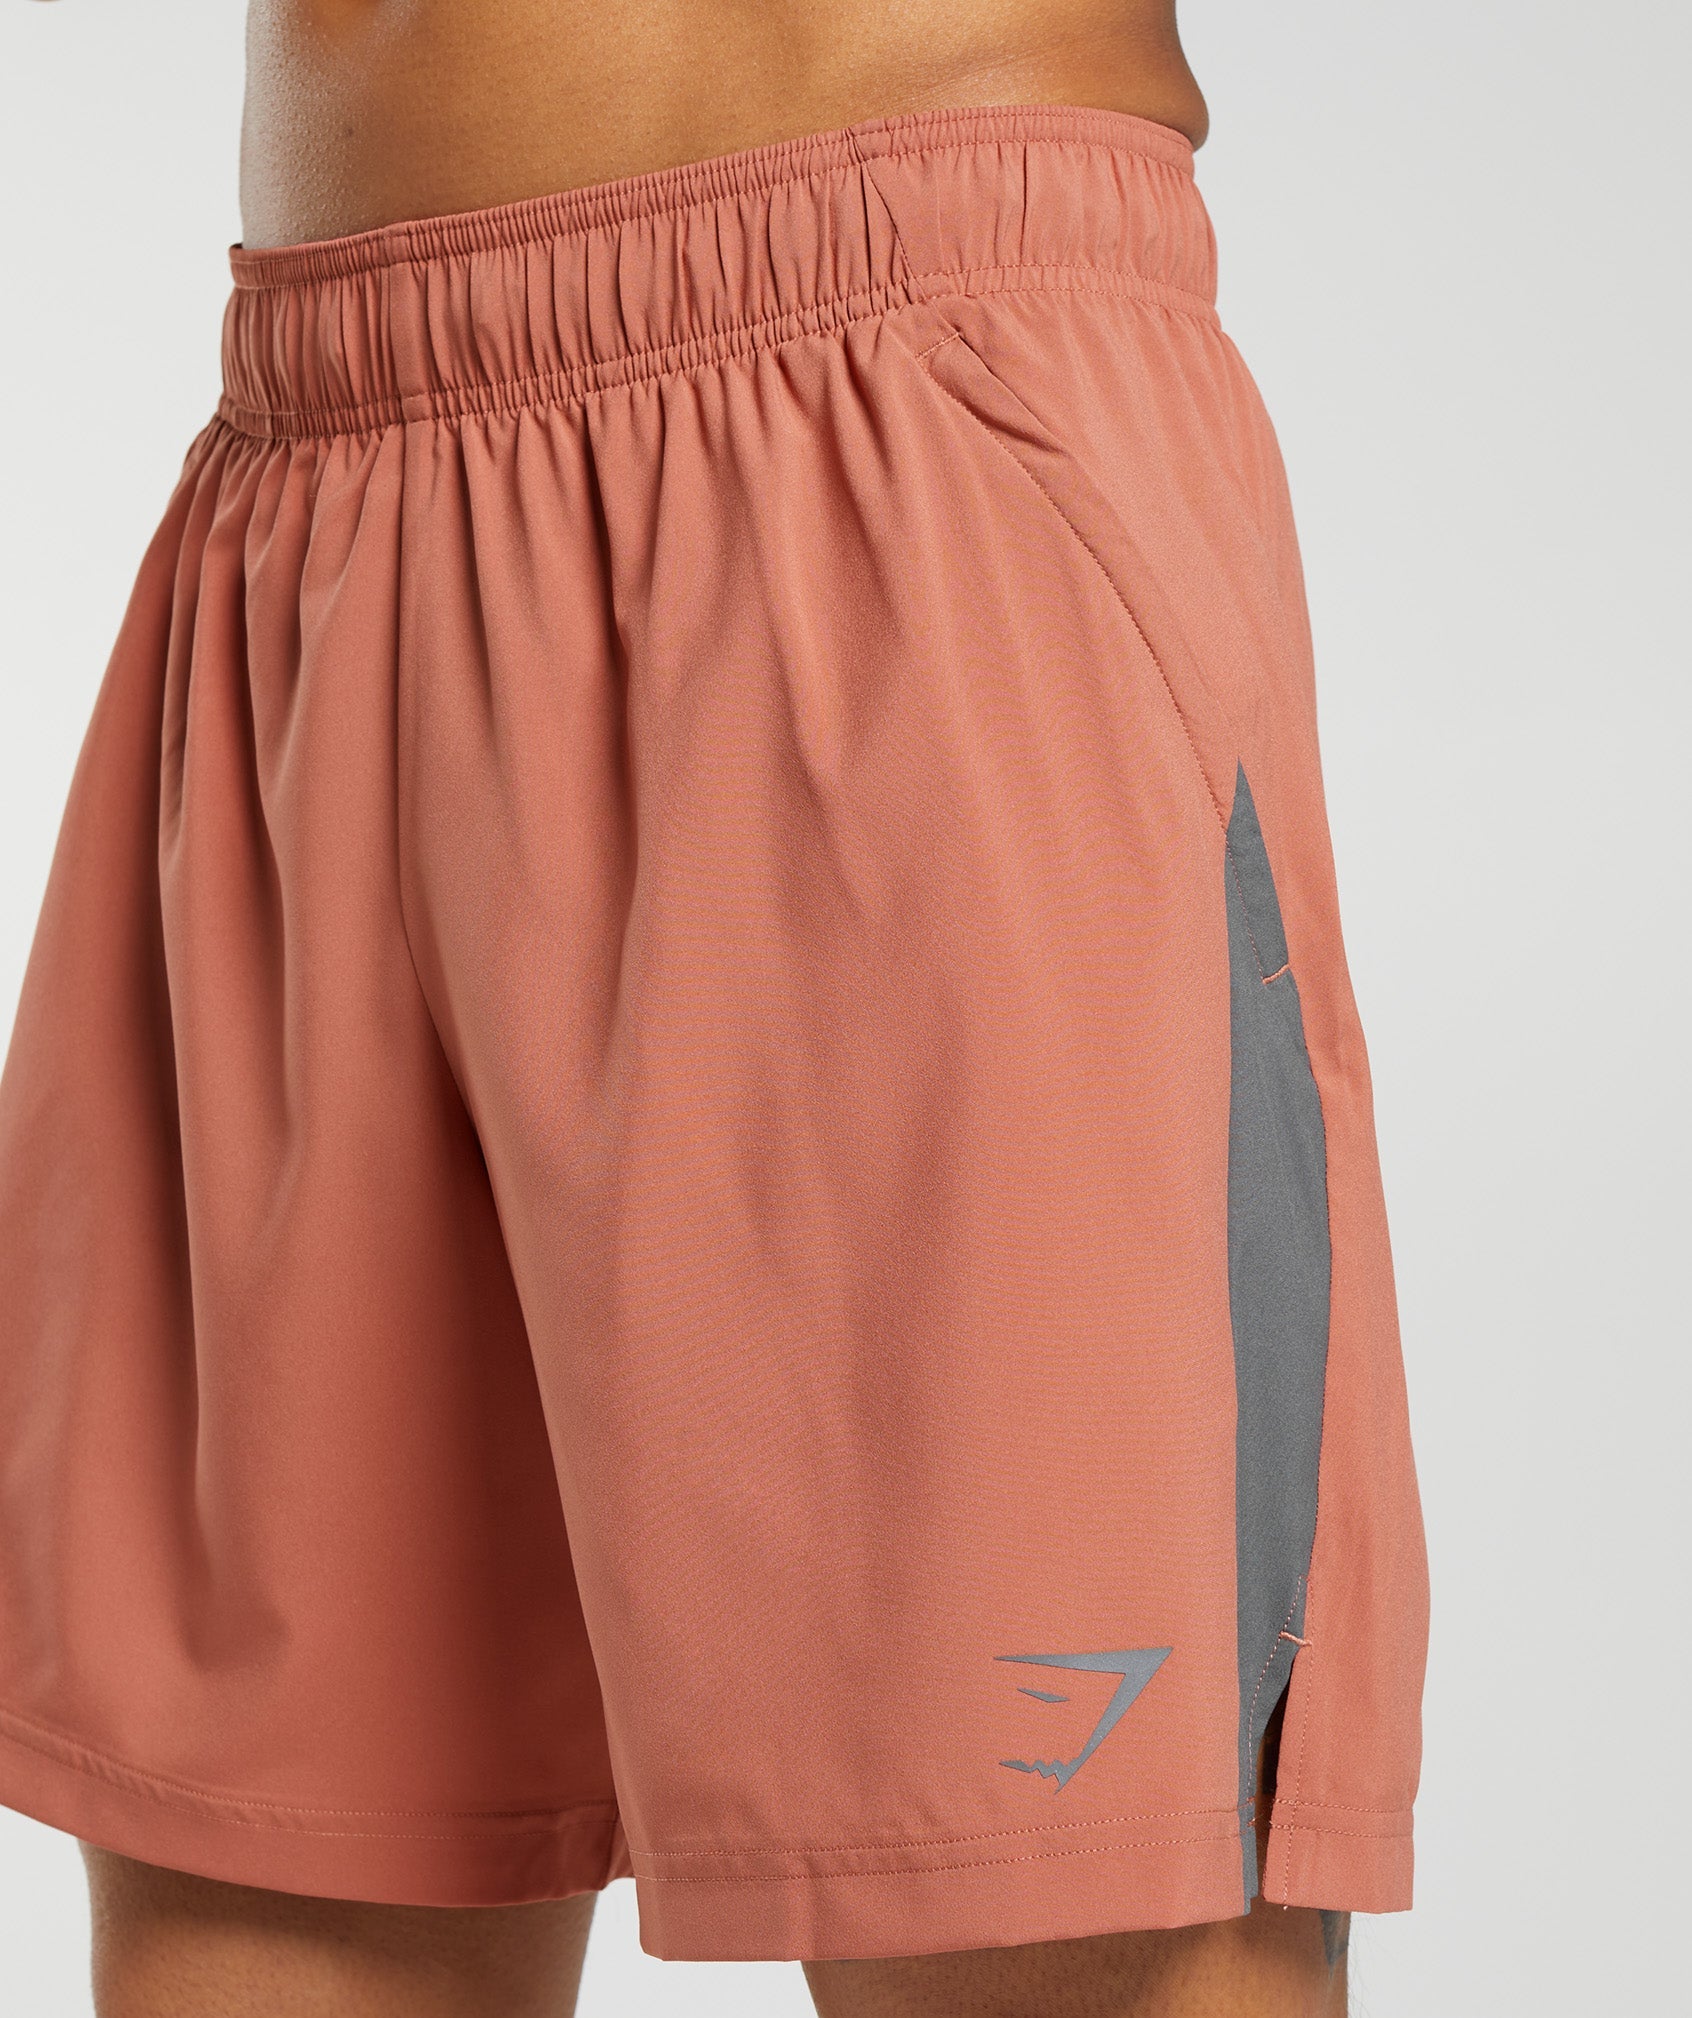 Gymshark Sport Shorts - Persimmon Red/Silhouette Grey